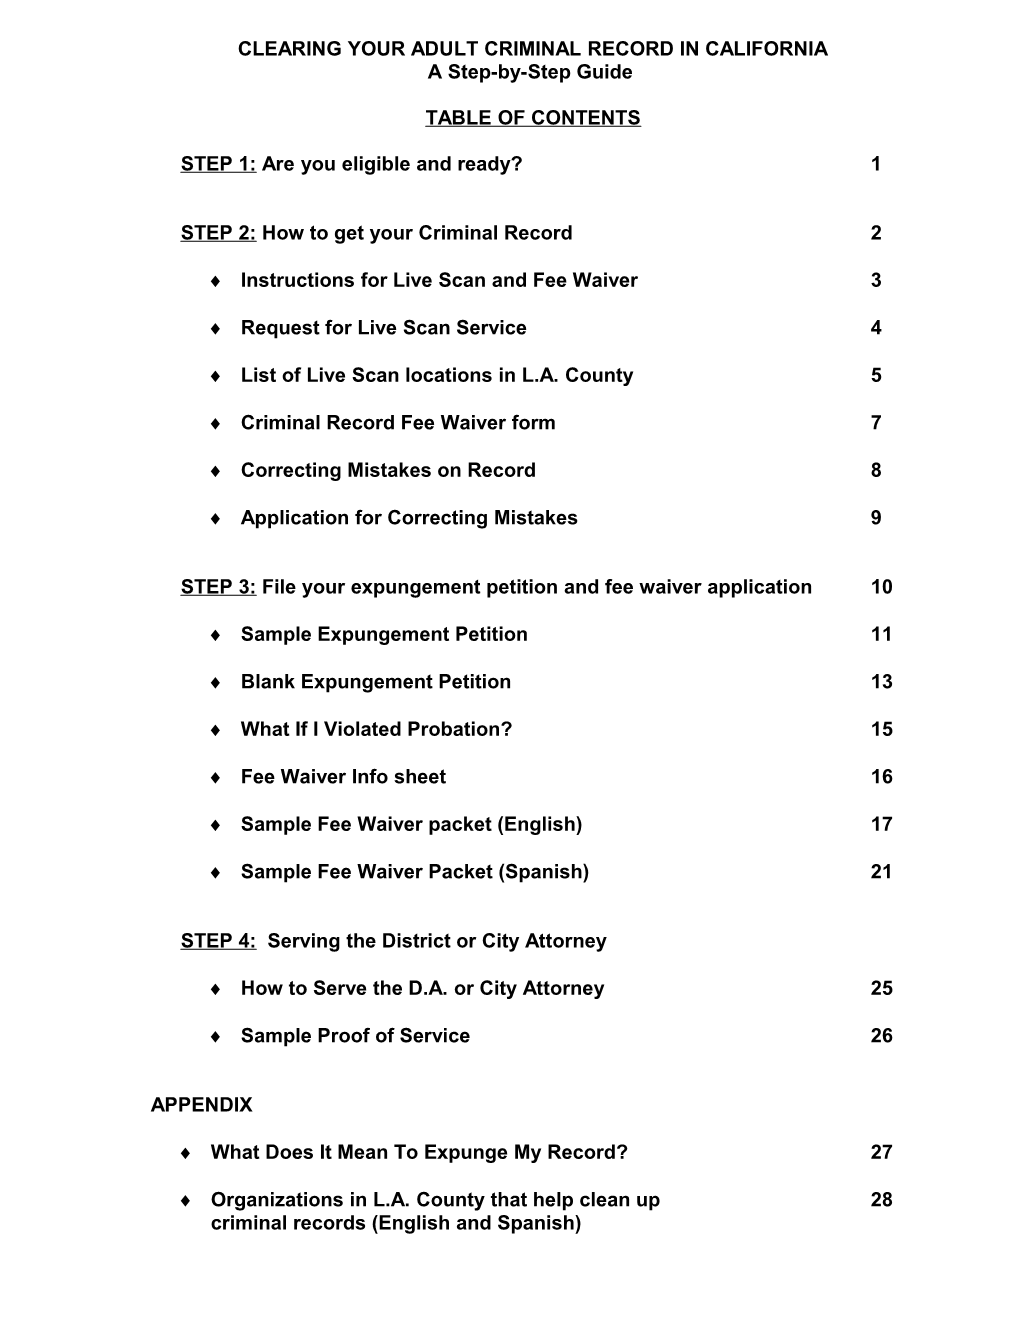 Table of Contents s221